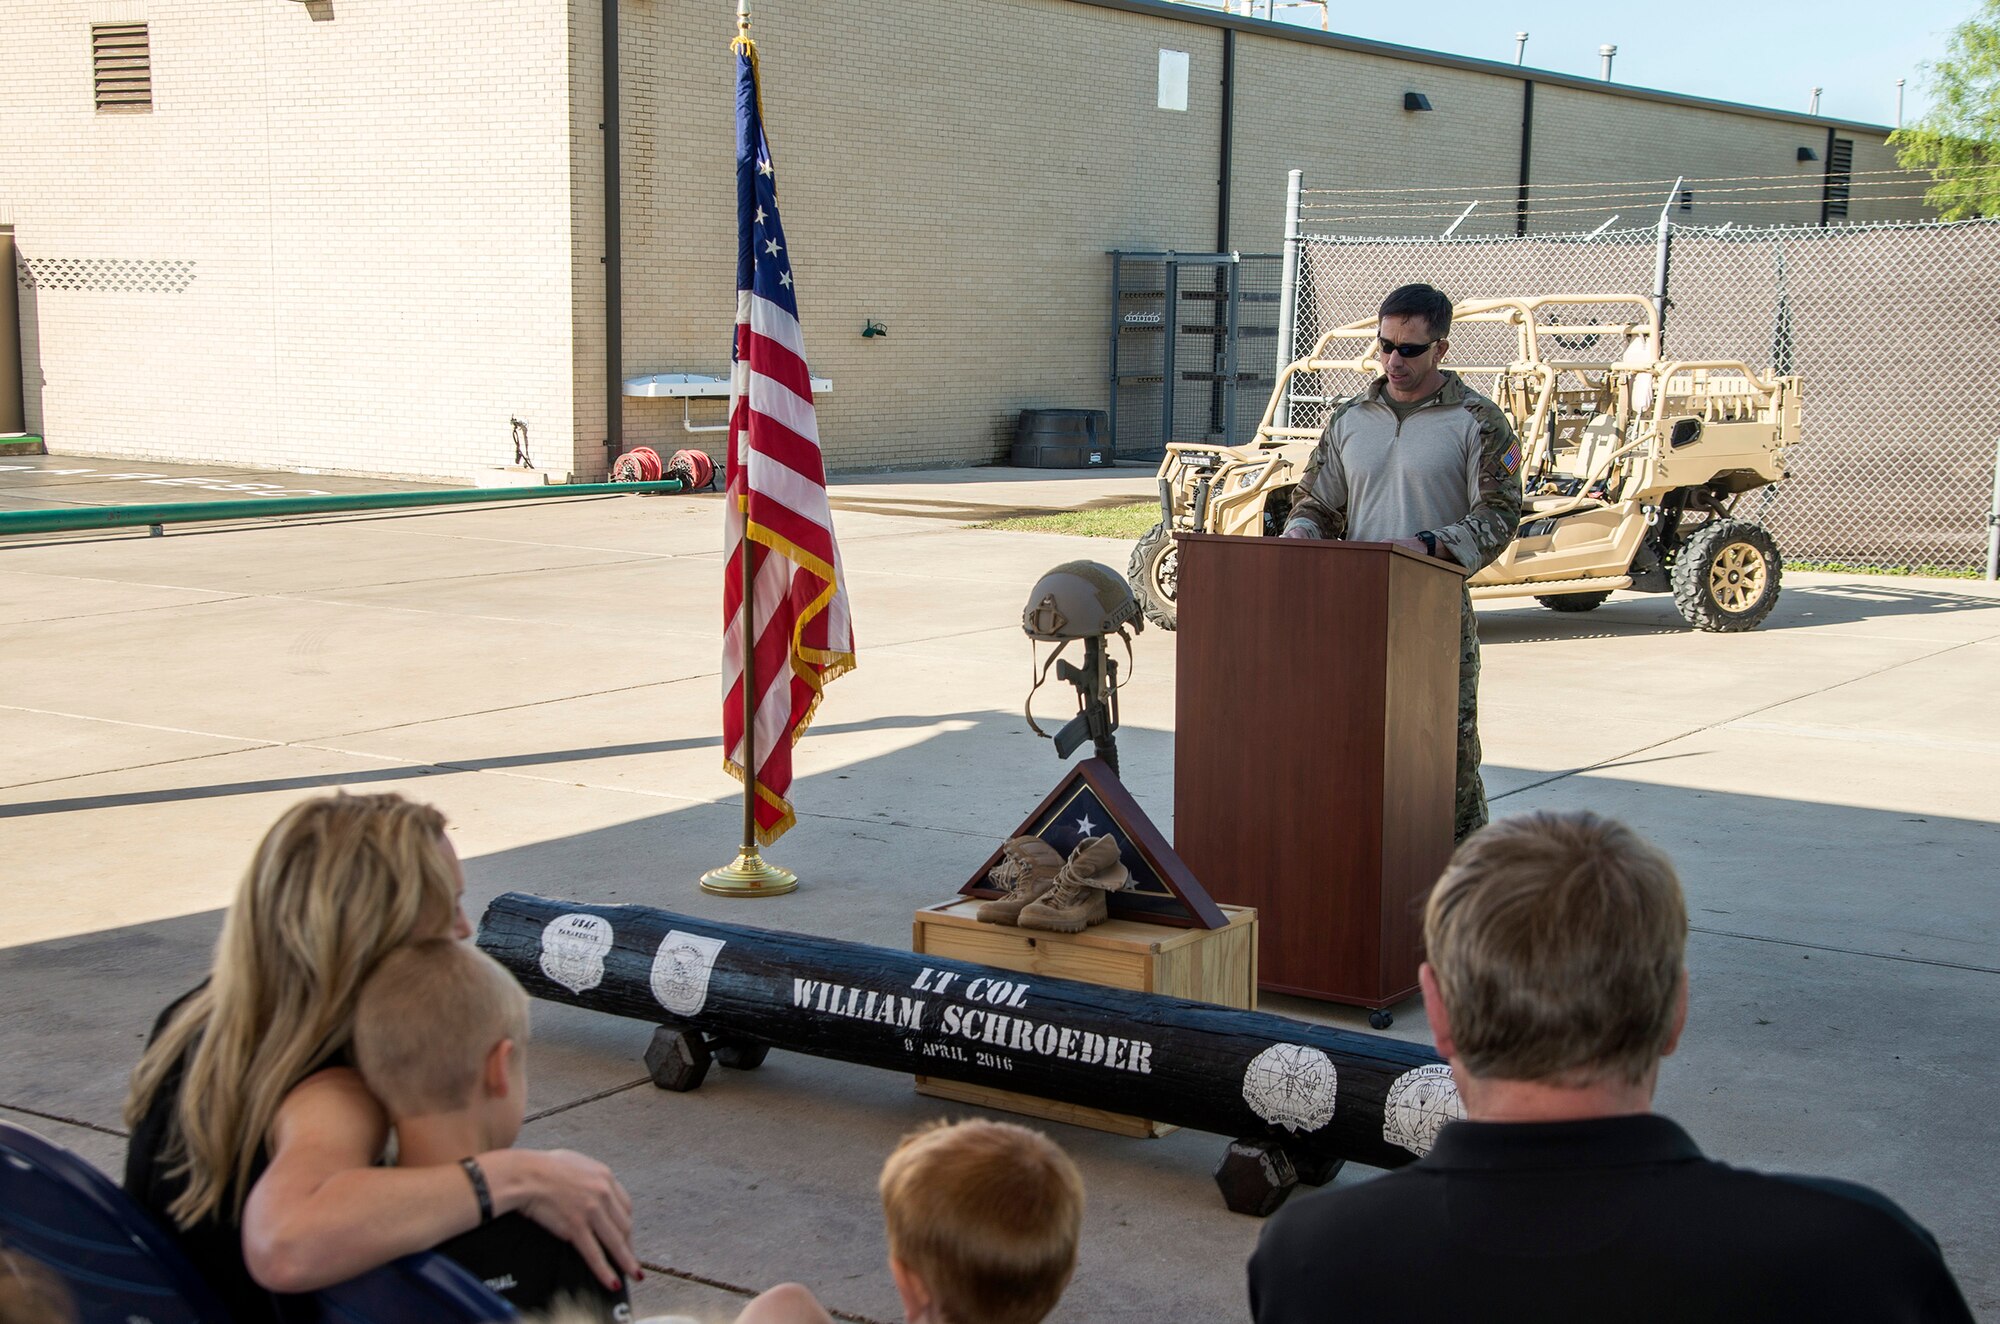 Col. Ronald Stenger, Battlefield Airmen Training Group commander, addresses the crowd during a memorial remembrance ceremony honoring Lt. Col. William “Bill” Schroeder April 7, 2017, at JBSA-Lackland, Texas, Medina Annex. Schroeder’s unit honored his legacy by renaming a drop zone as Schroeder DZ and participated in a "Monster Mash" fitness competition, remembrance ceremony and log march.  On April 8th, 2016 Schroeder recognized a perilous situation developing and reacted swiftly by putting himself between an armed individual and his first sergeant. In the process, he saved lives of other squadron members while being fatally wounded. Schroeder was posthumously awarded the Airman’s Medal, given to those that distinguish themselves by a heroic act – usually at the volunteer risk of their lives but not involving combat. (U.S. Air Force photo by Johnny Saldivar)

